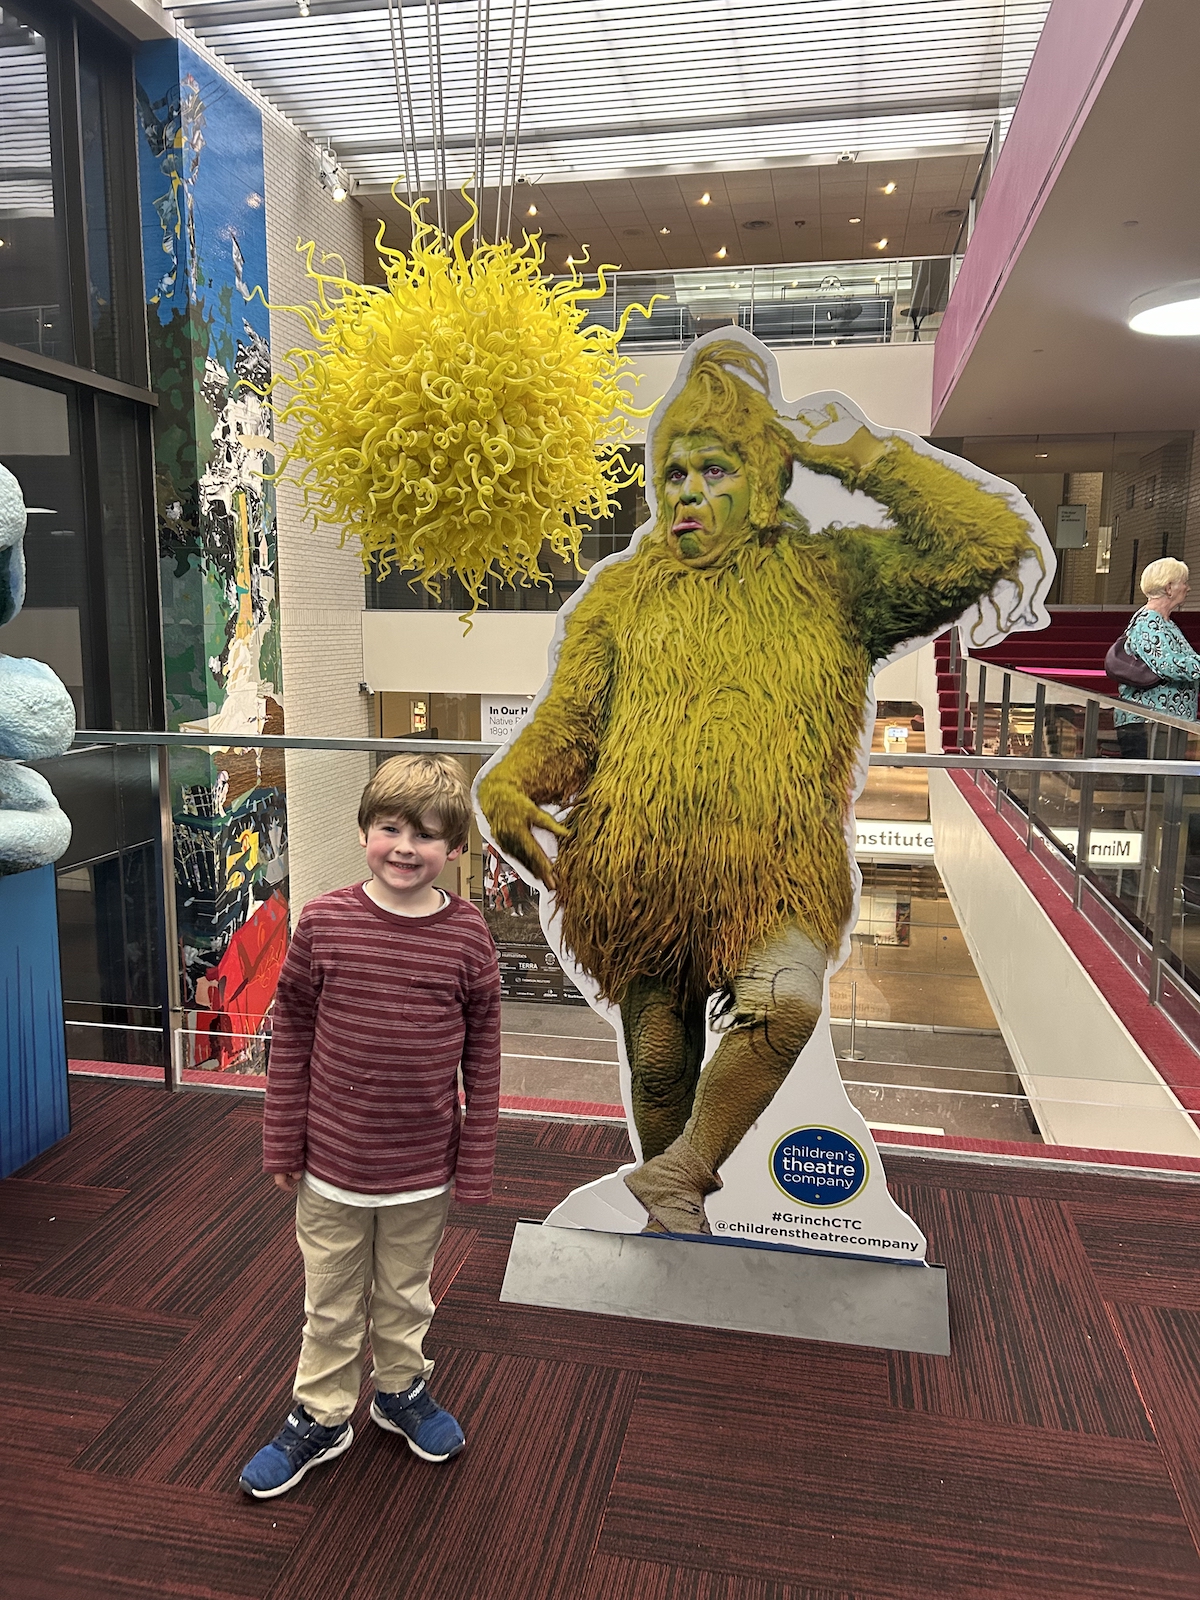 Author's son in front of Grinch cut out at CTC.